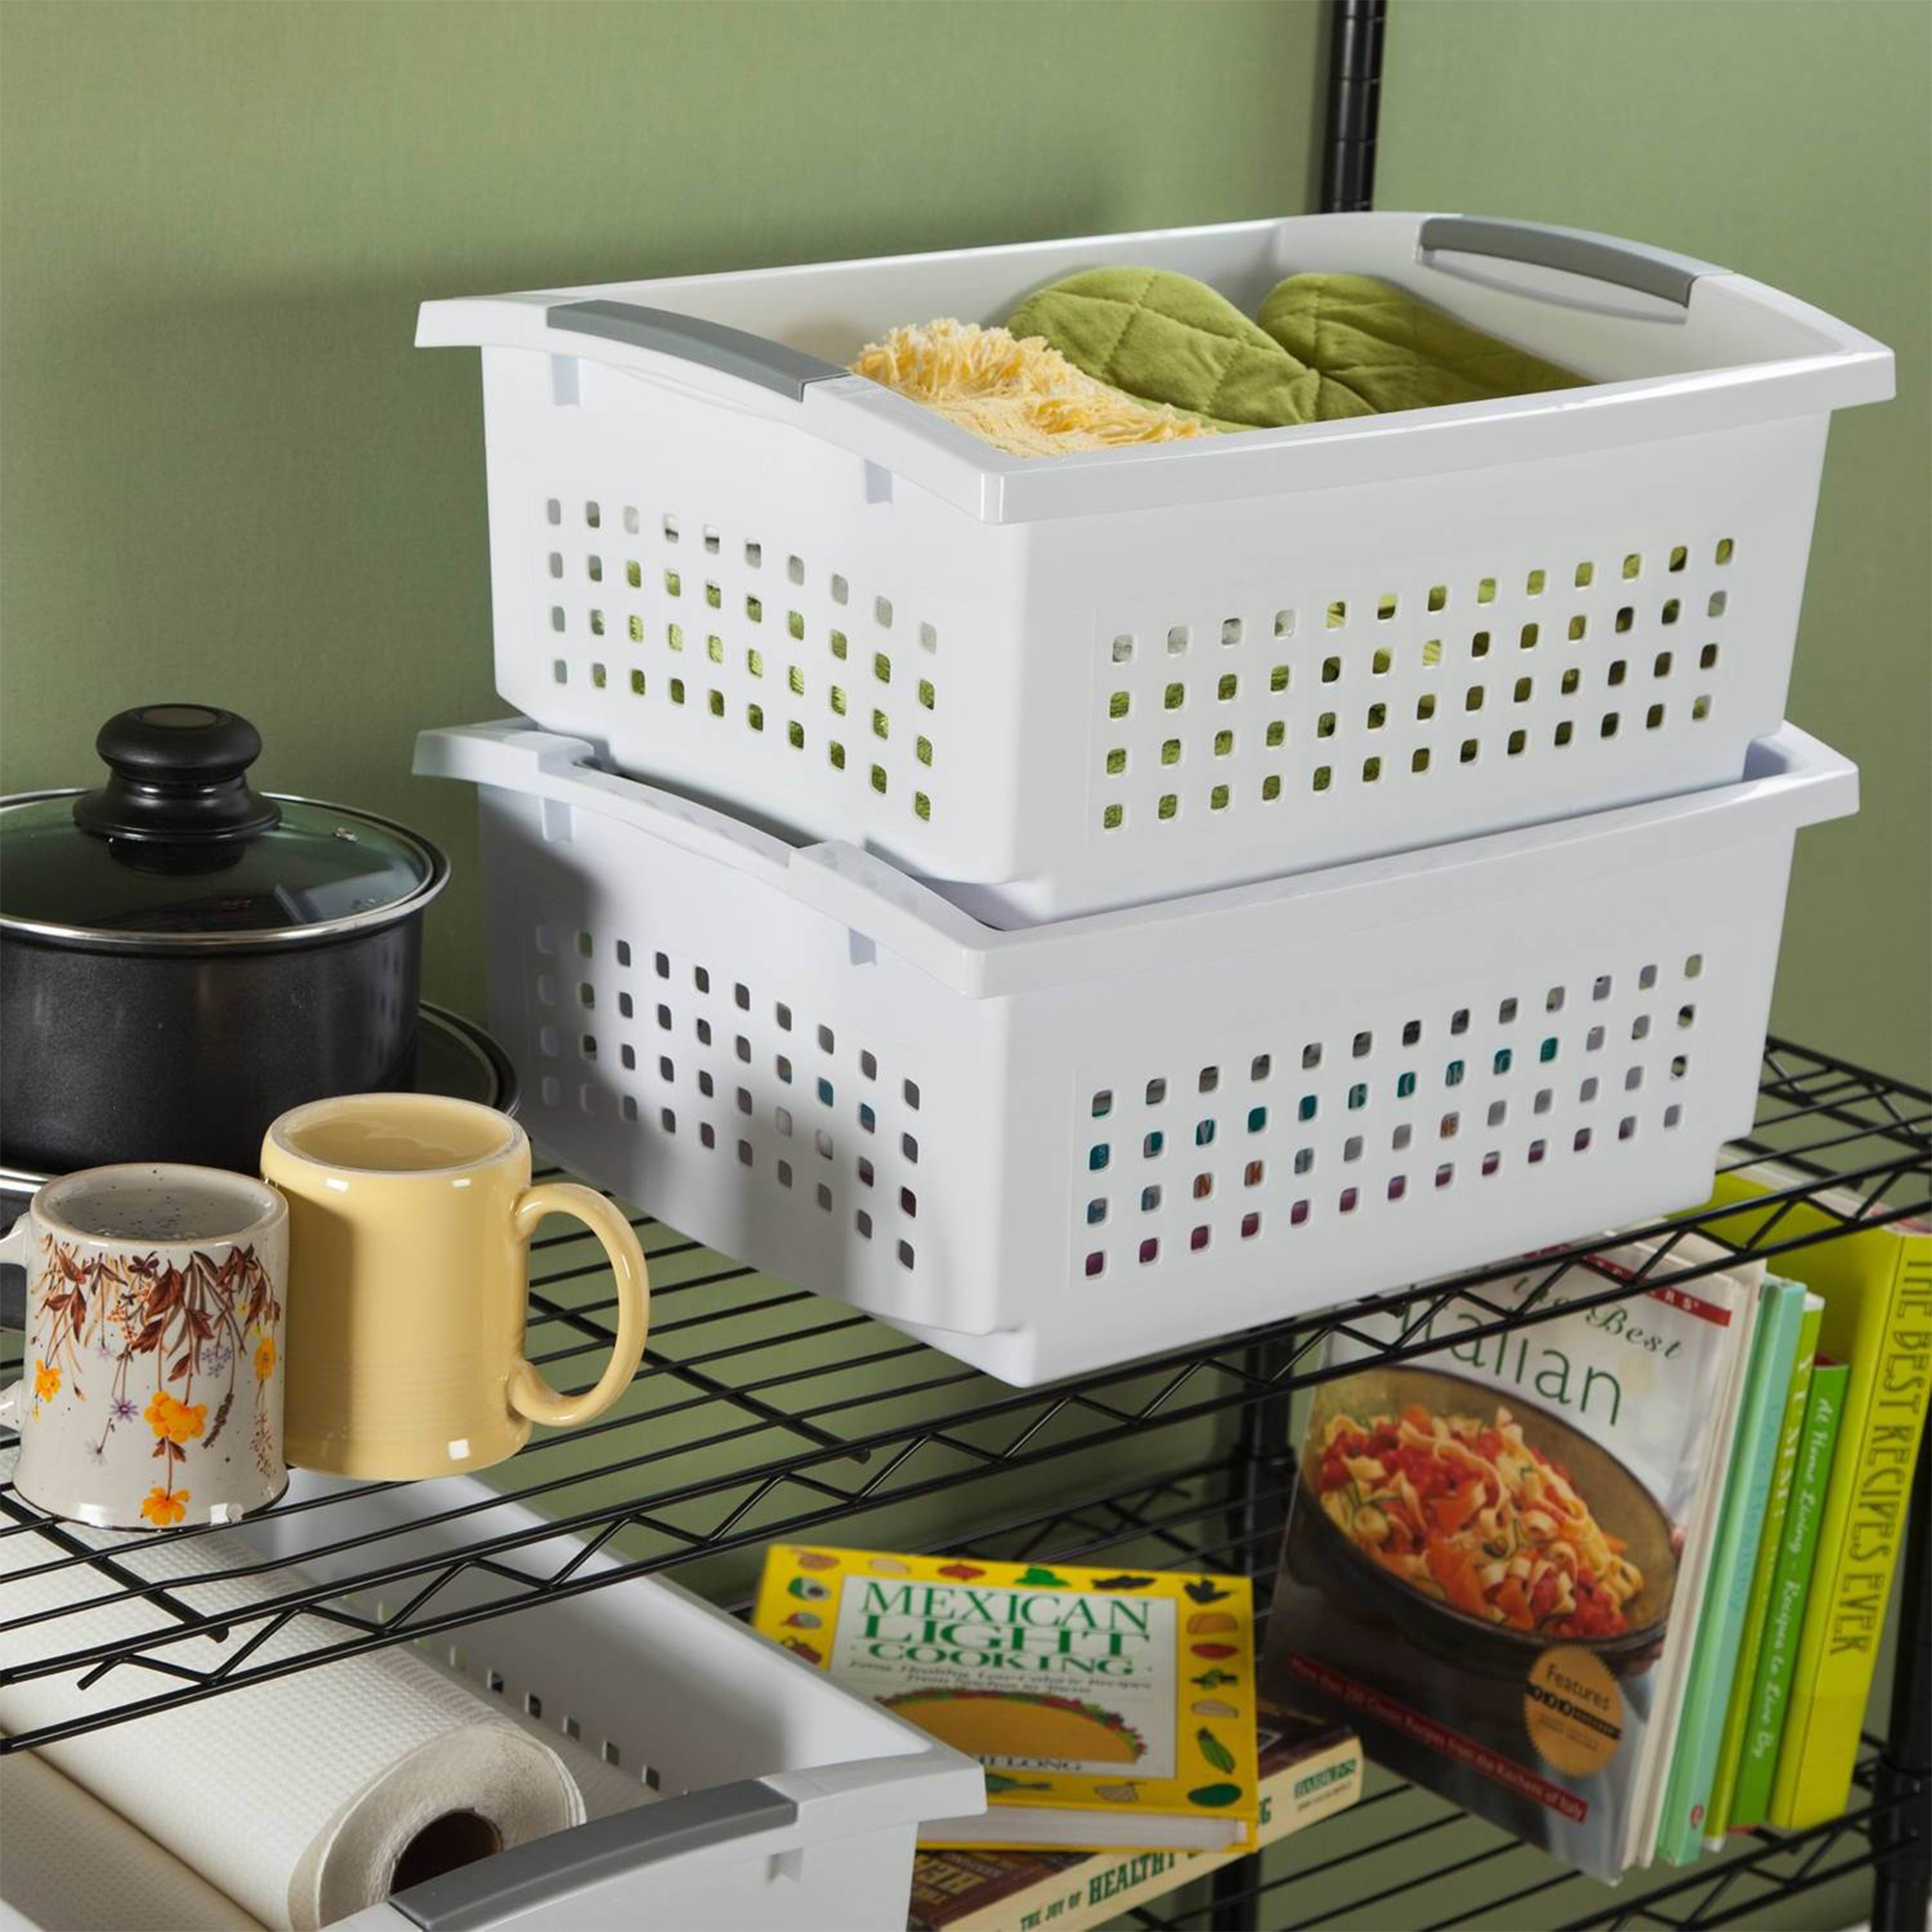 Sterilite Small Stacking Storage Basket with Comfort Grip Handles, 8 Pack - image 4 of 11